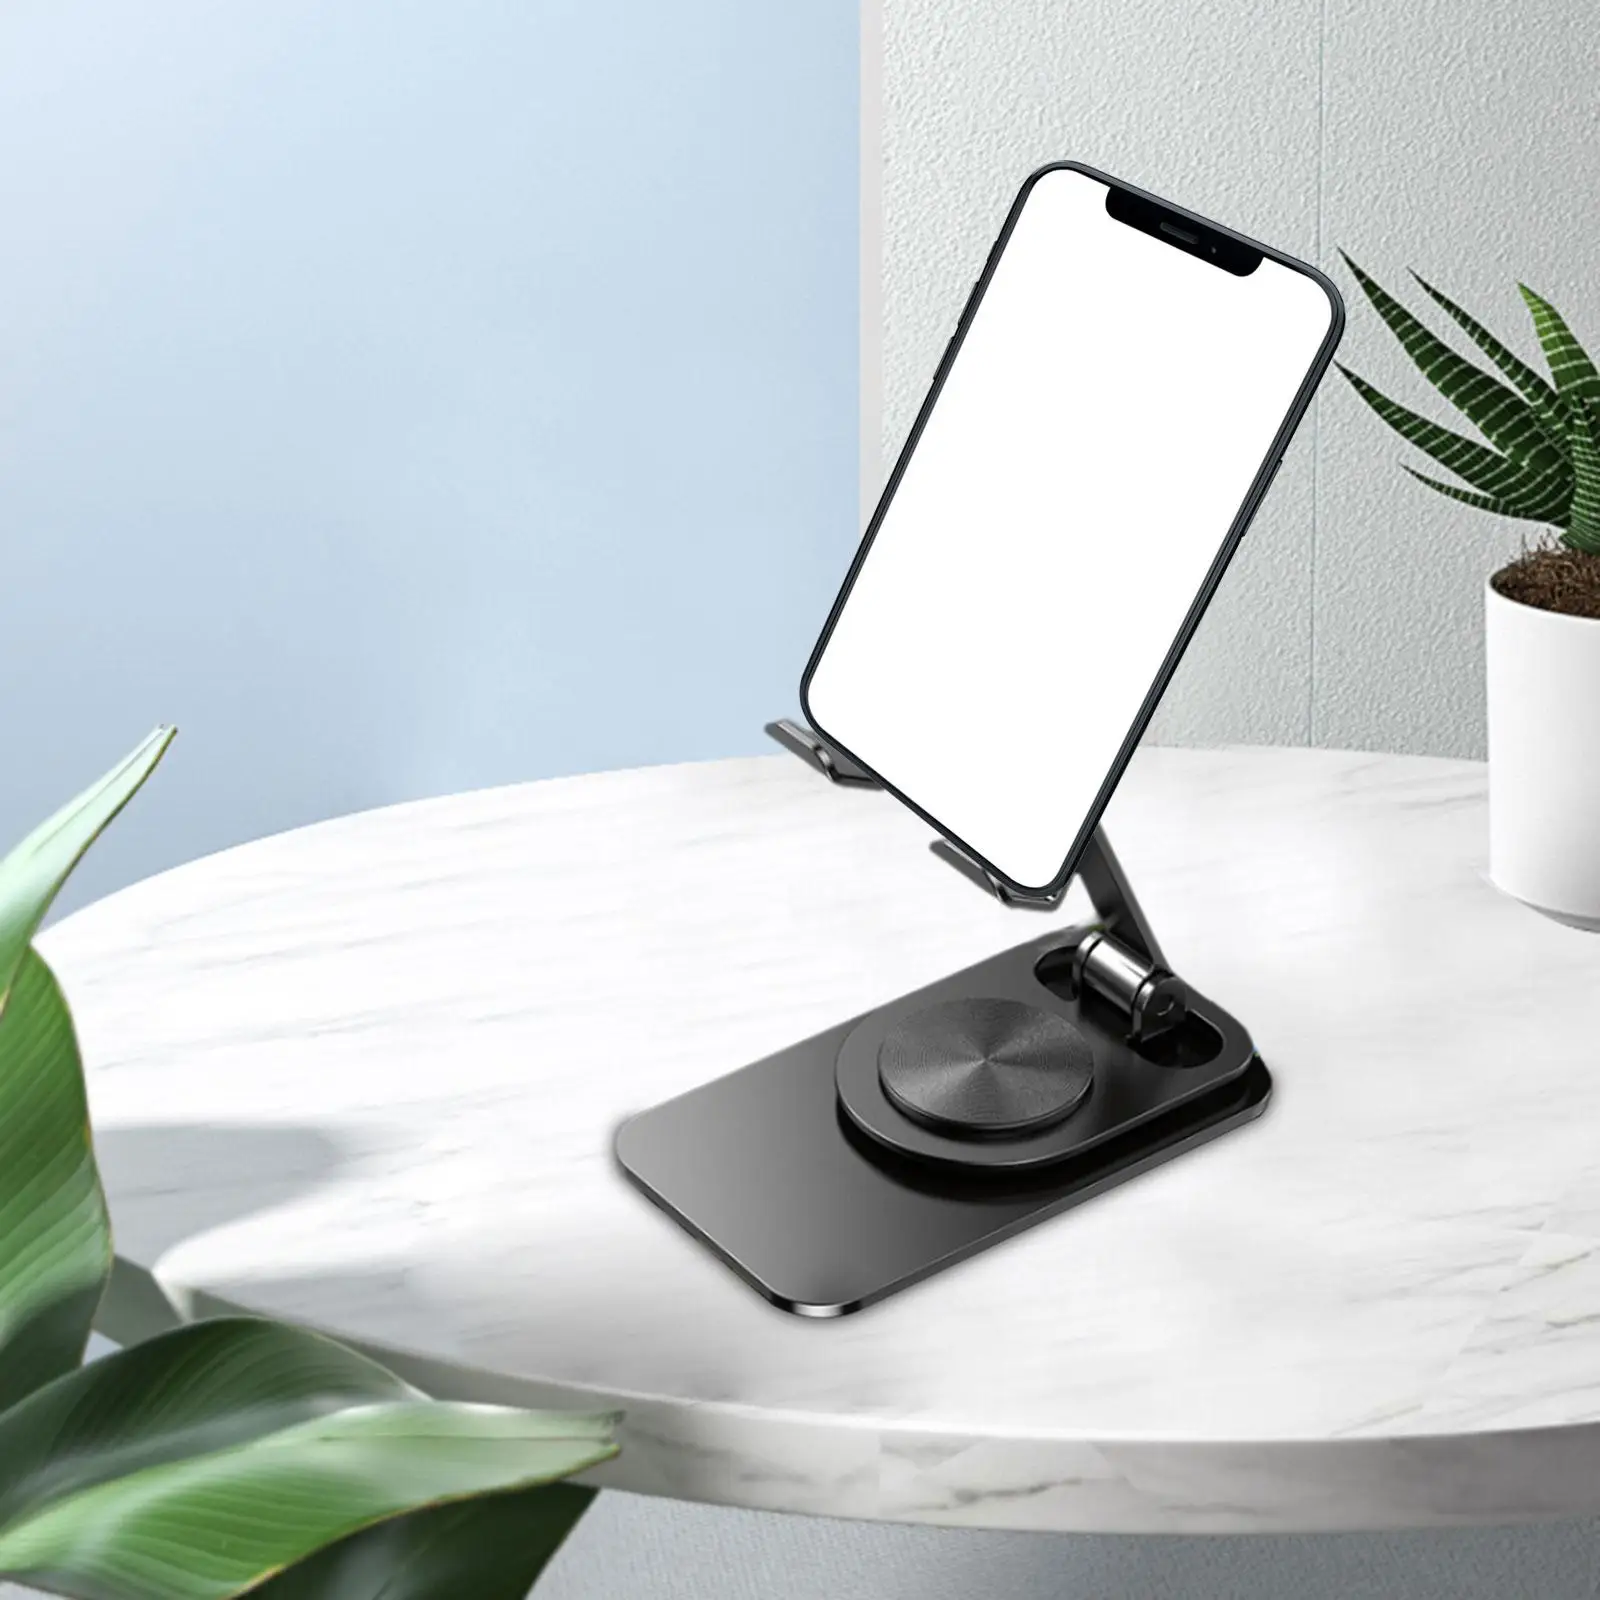 Phone Stand Foldable Non Slip Angle Height Universal Adjustable Desktop Phone Holder for Phone All Phones Tablet Cell Phone Desk